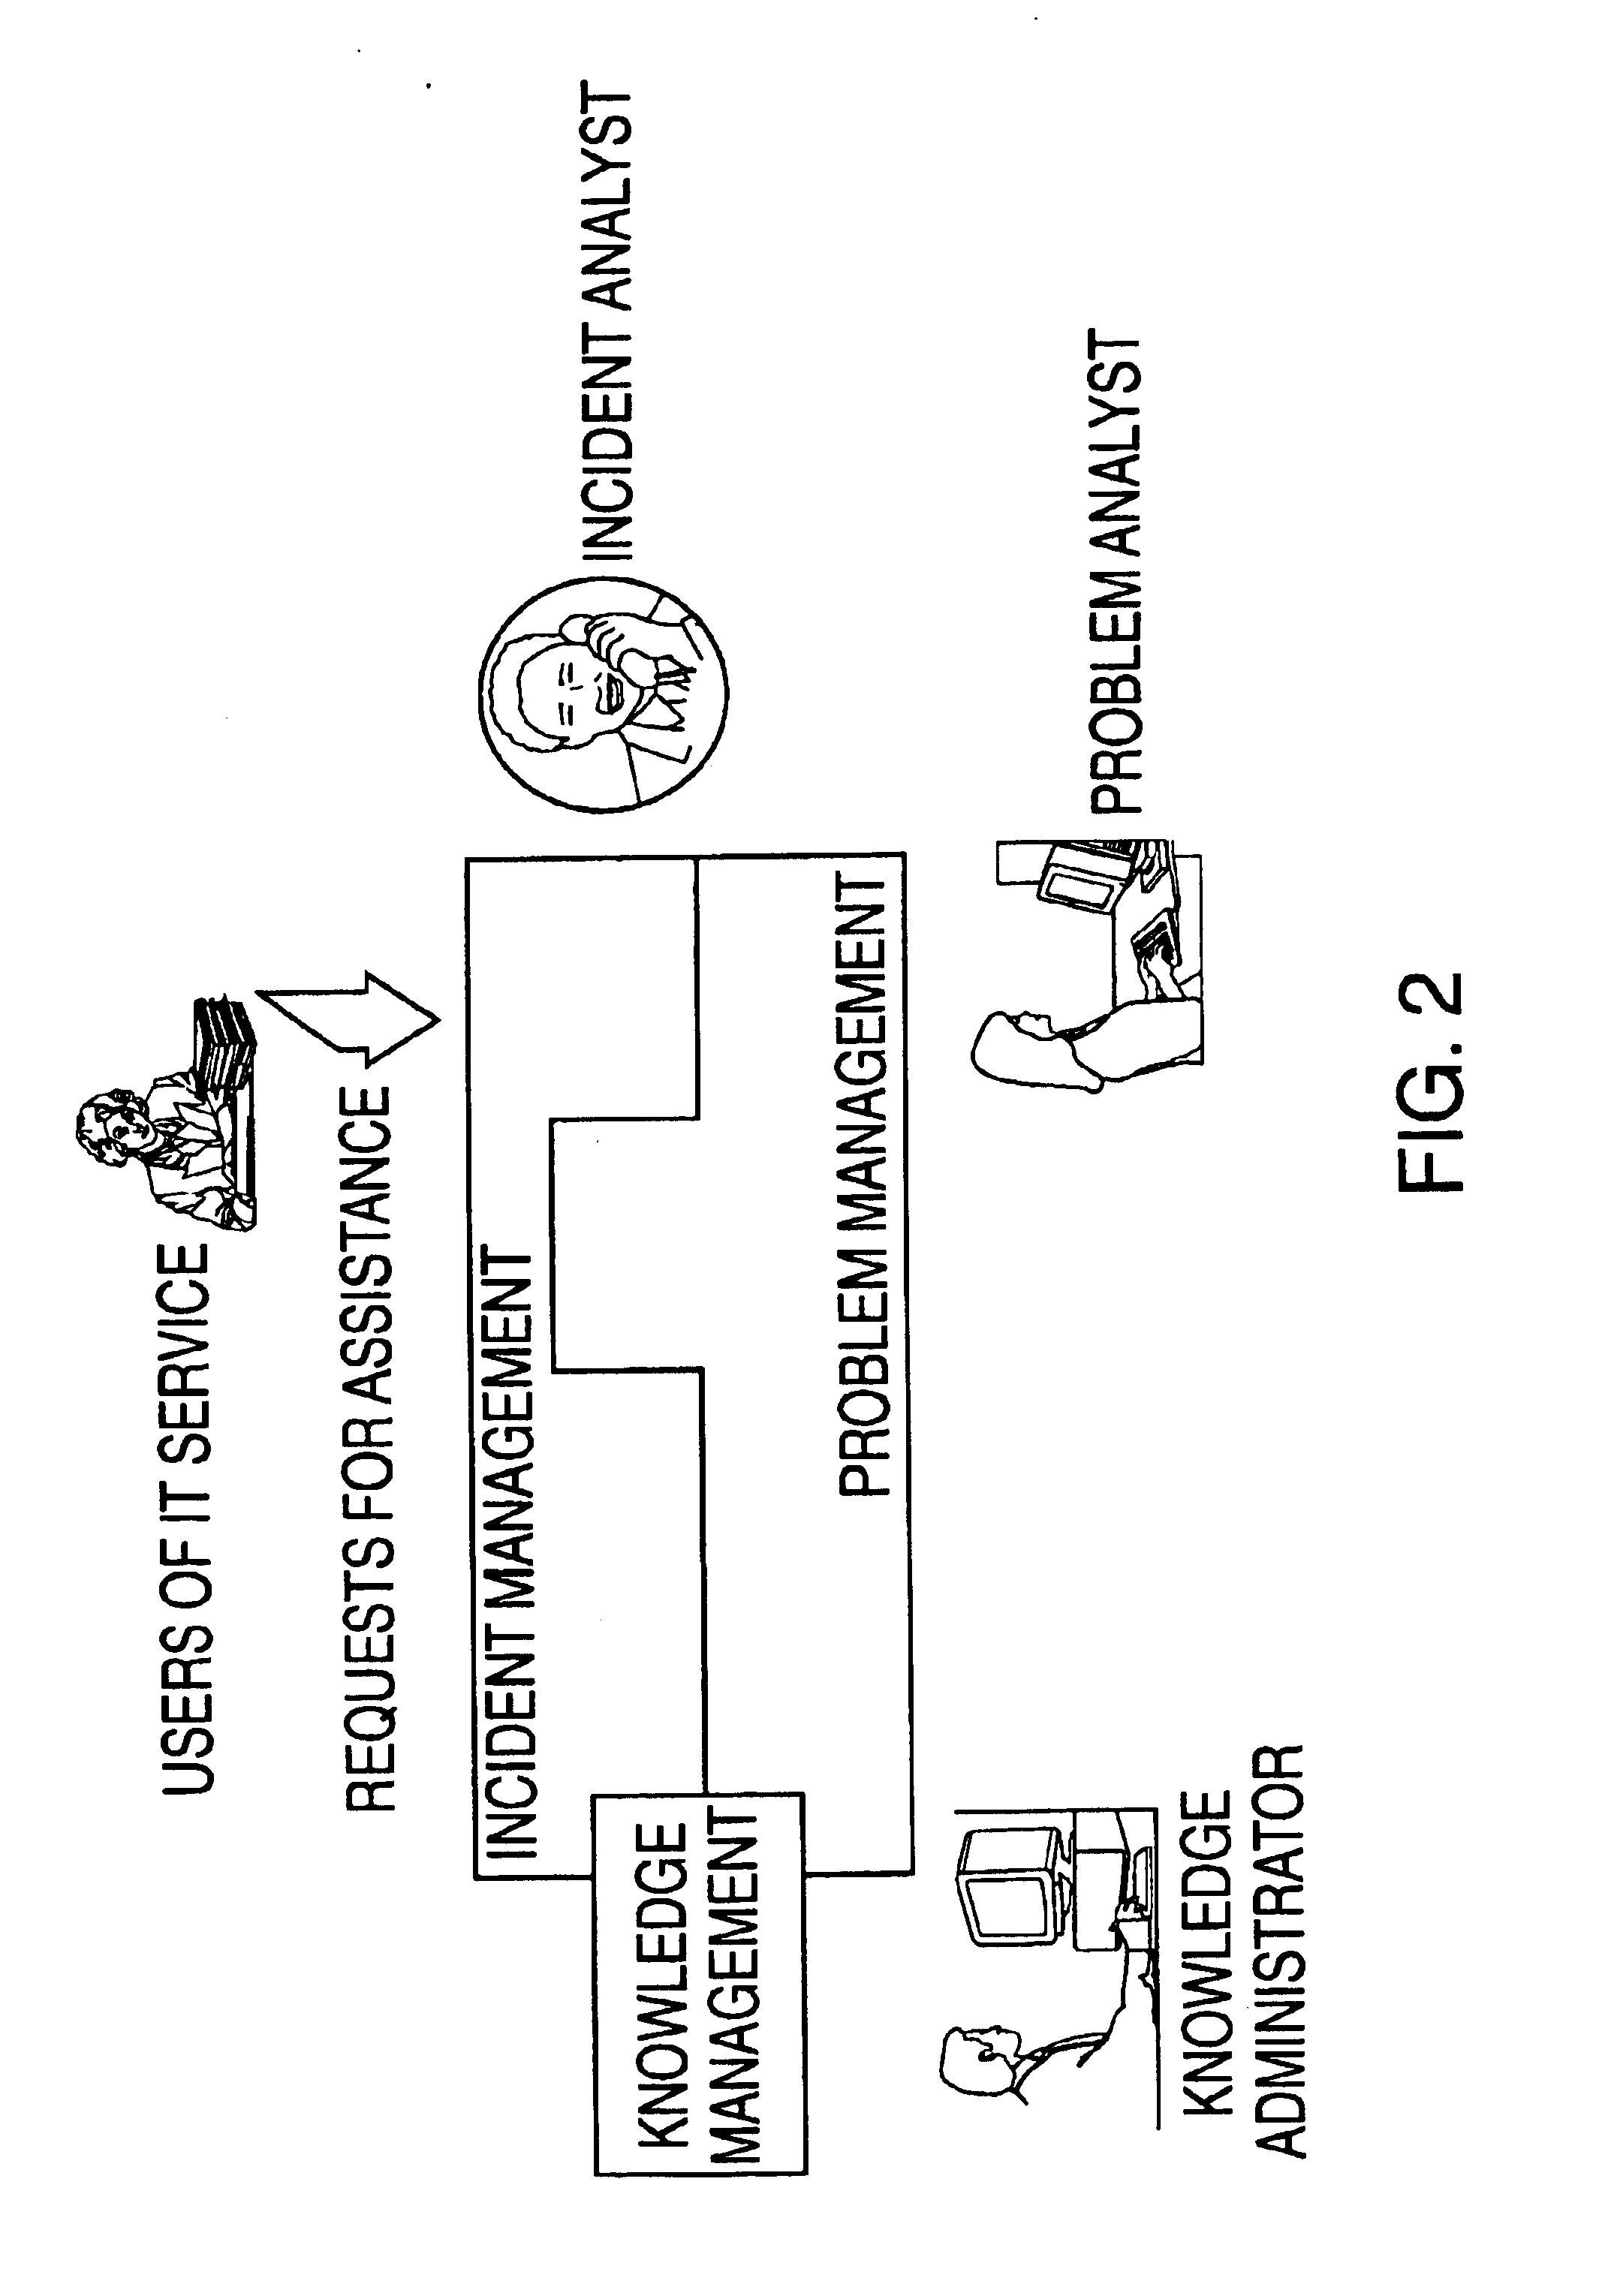 Method and system for generating management solutions